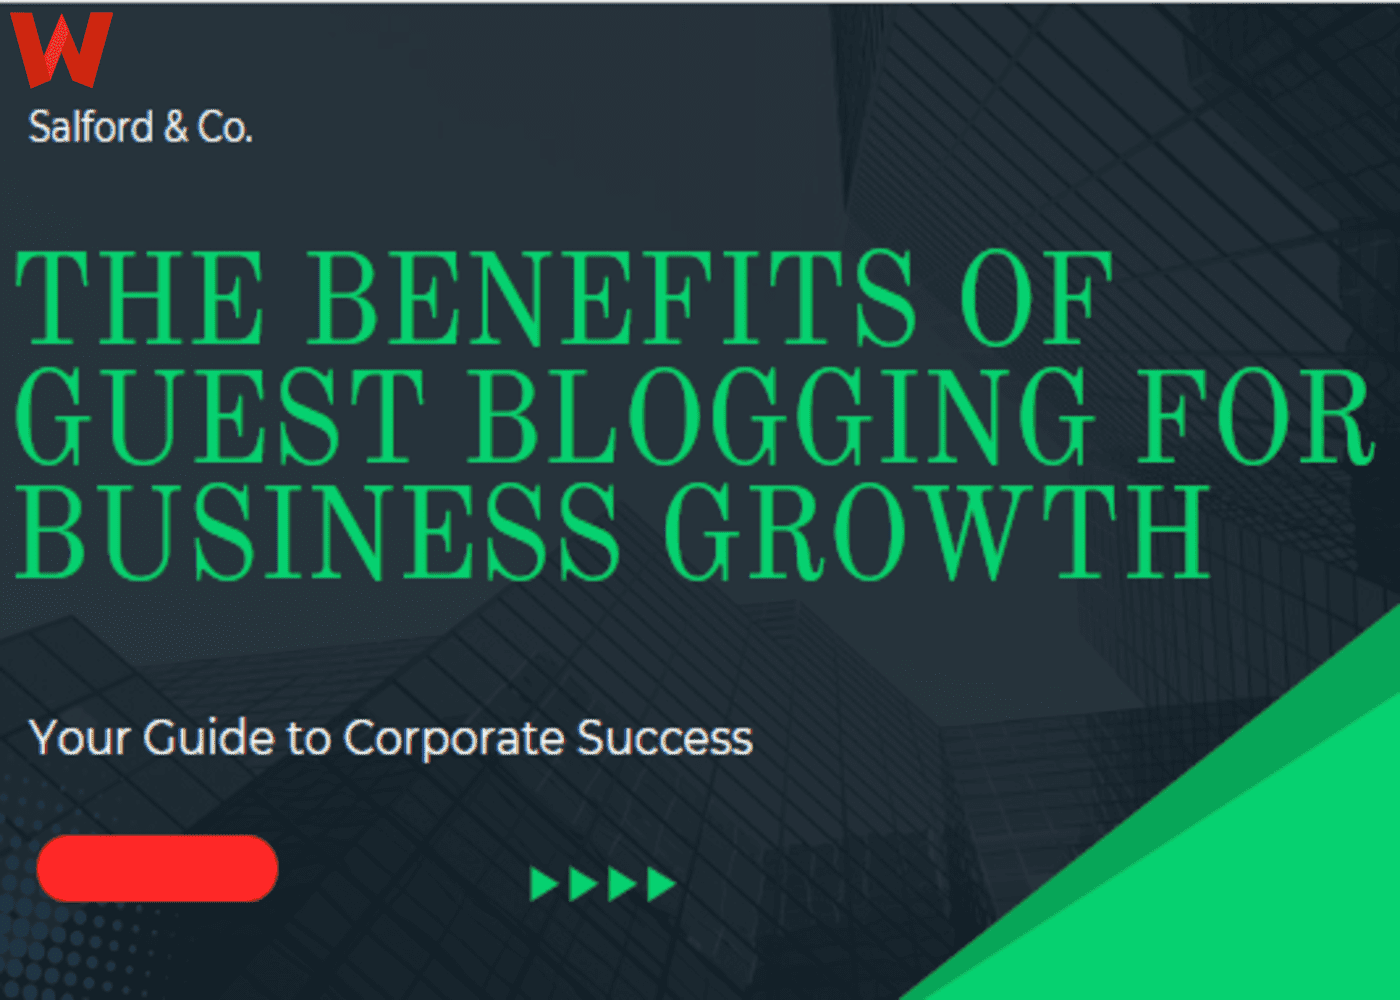 The Benefits of Guest Blogging for Business Growth